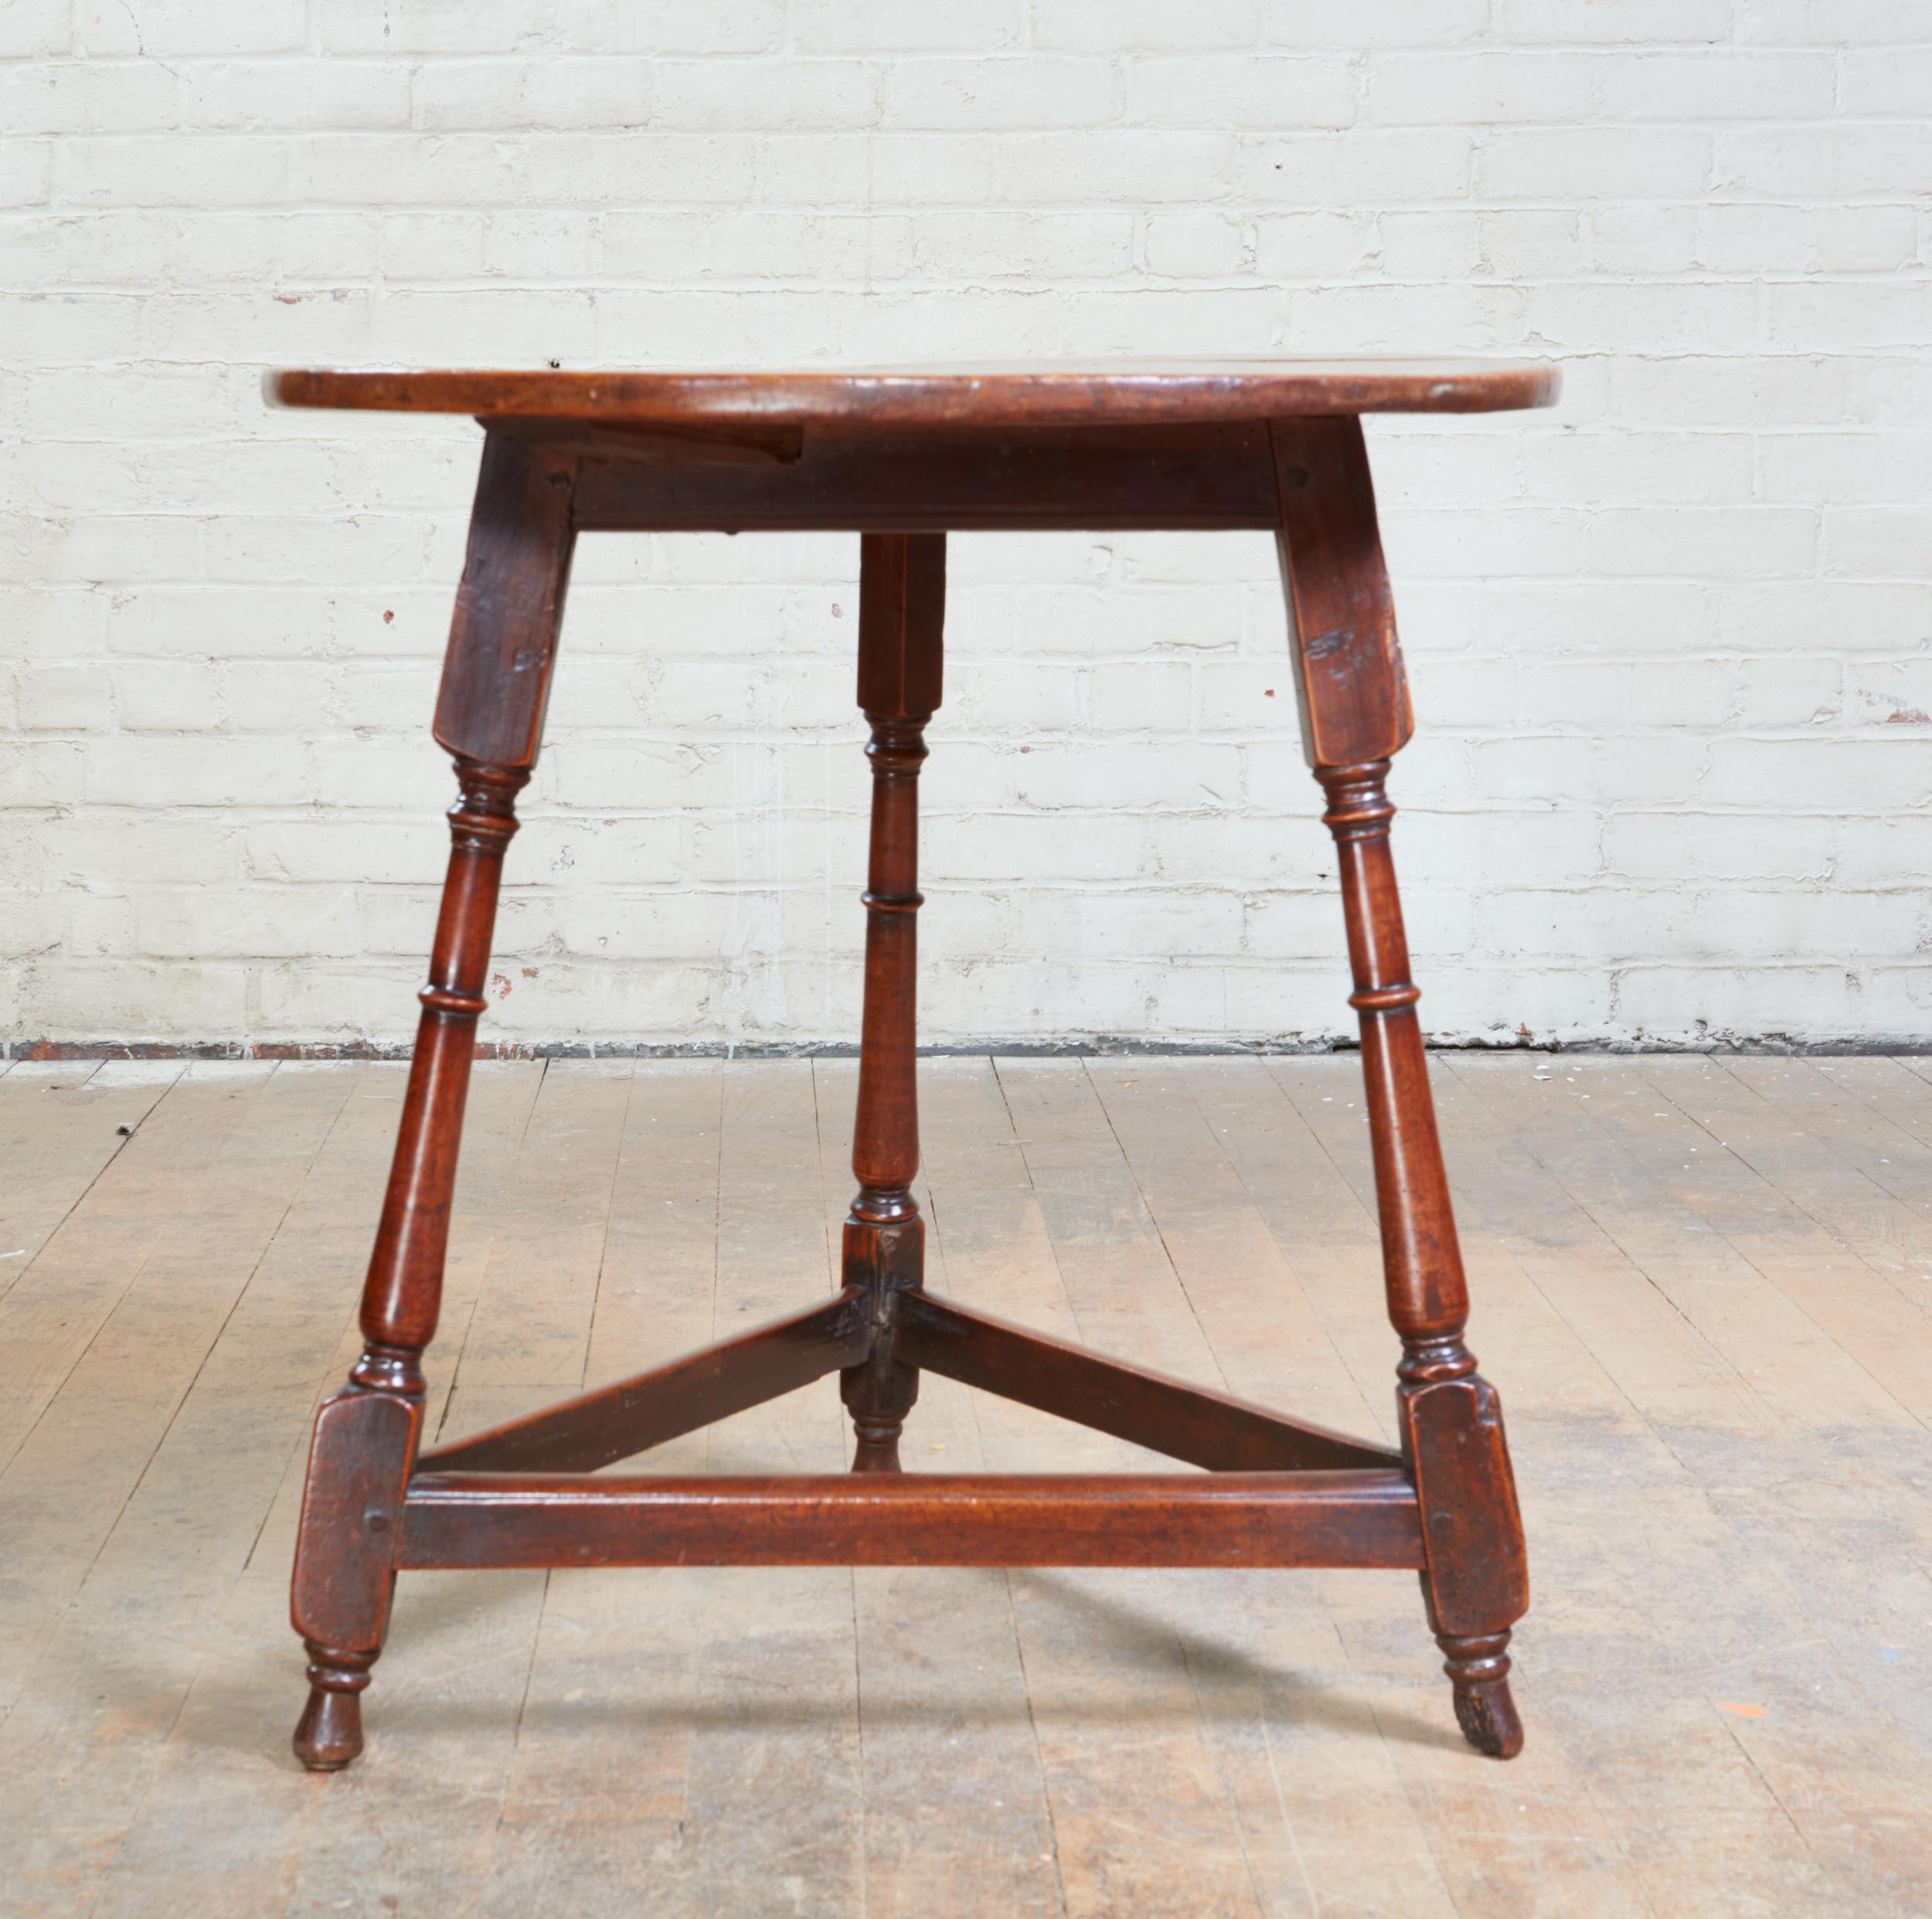 Good early 18th Century English or Welsh fruitwood cricket table, the well patinated top over three balustrade turned splayed legs joined by triangular box stretchers, and standing on original turned feet, the whole with excellent color and patina.